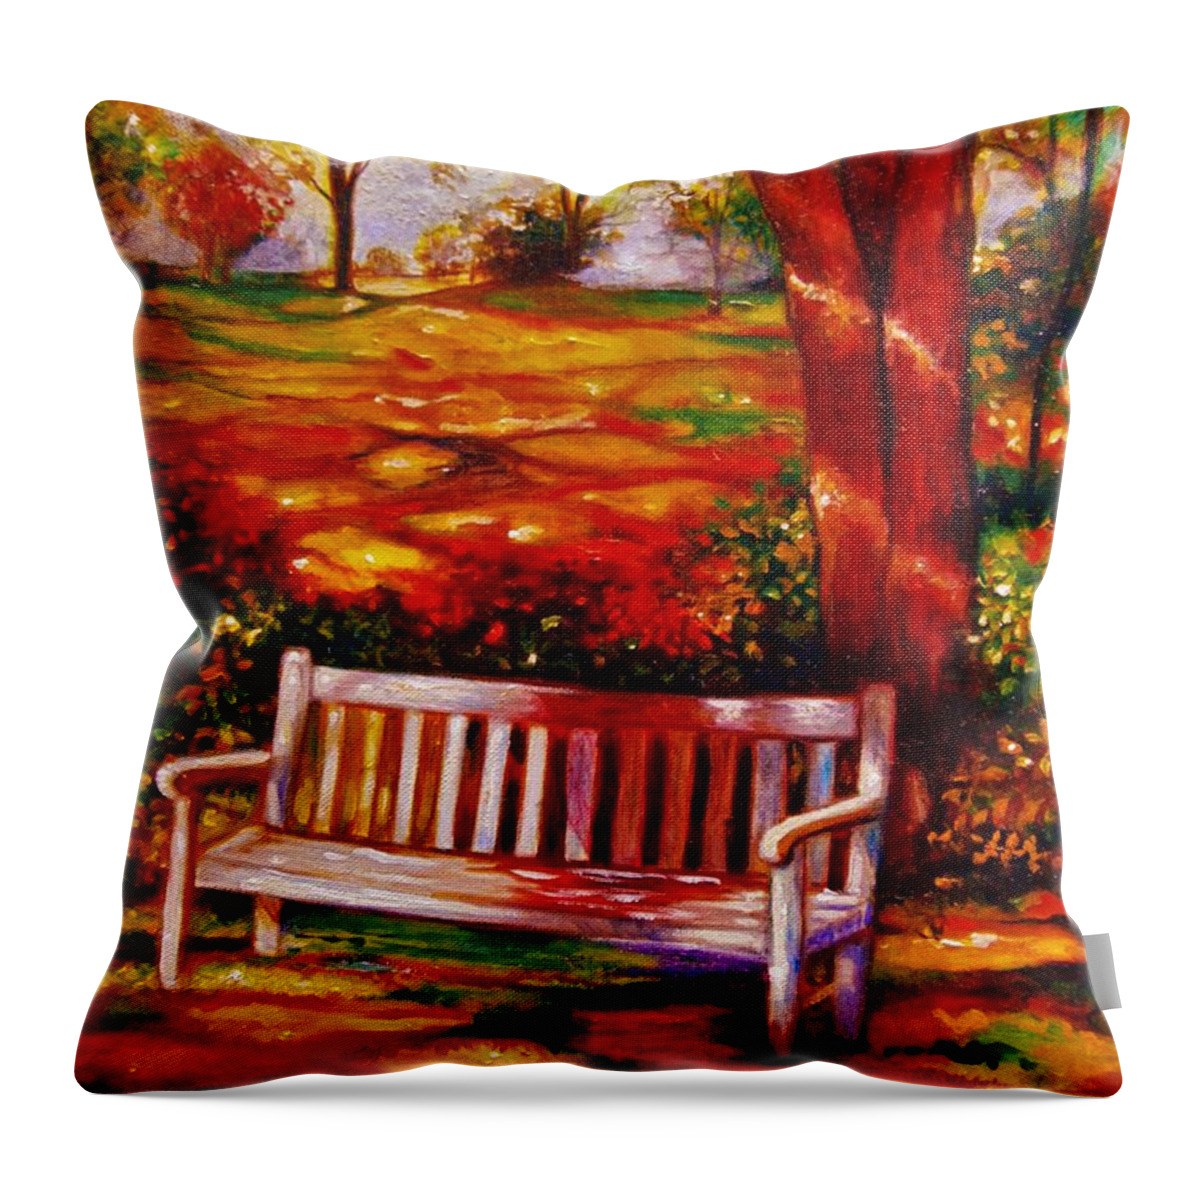 Landscape Throw Pillow featuring the painting Good morning by Emery Franklin